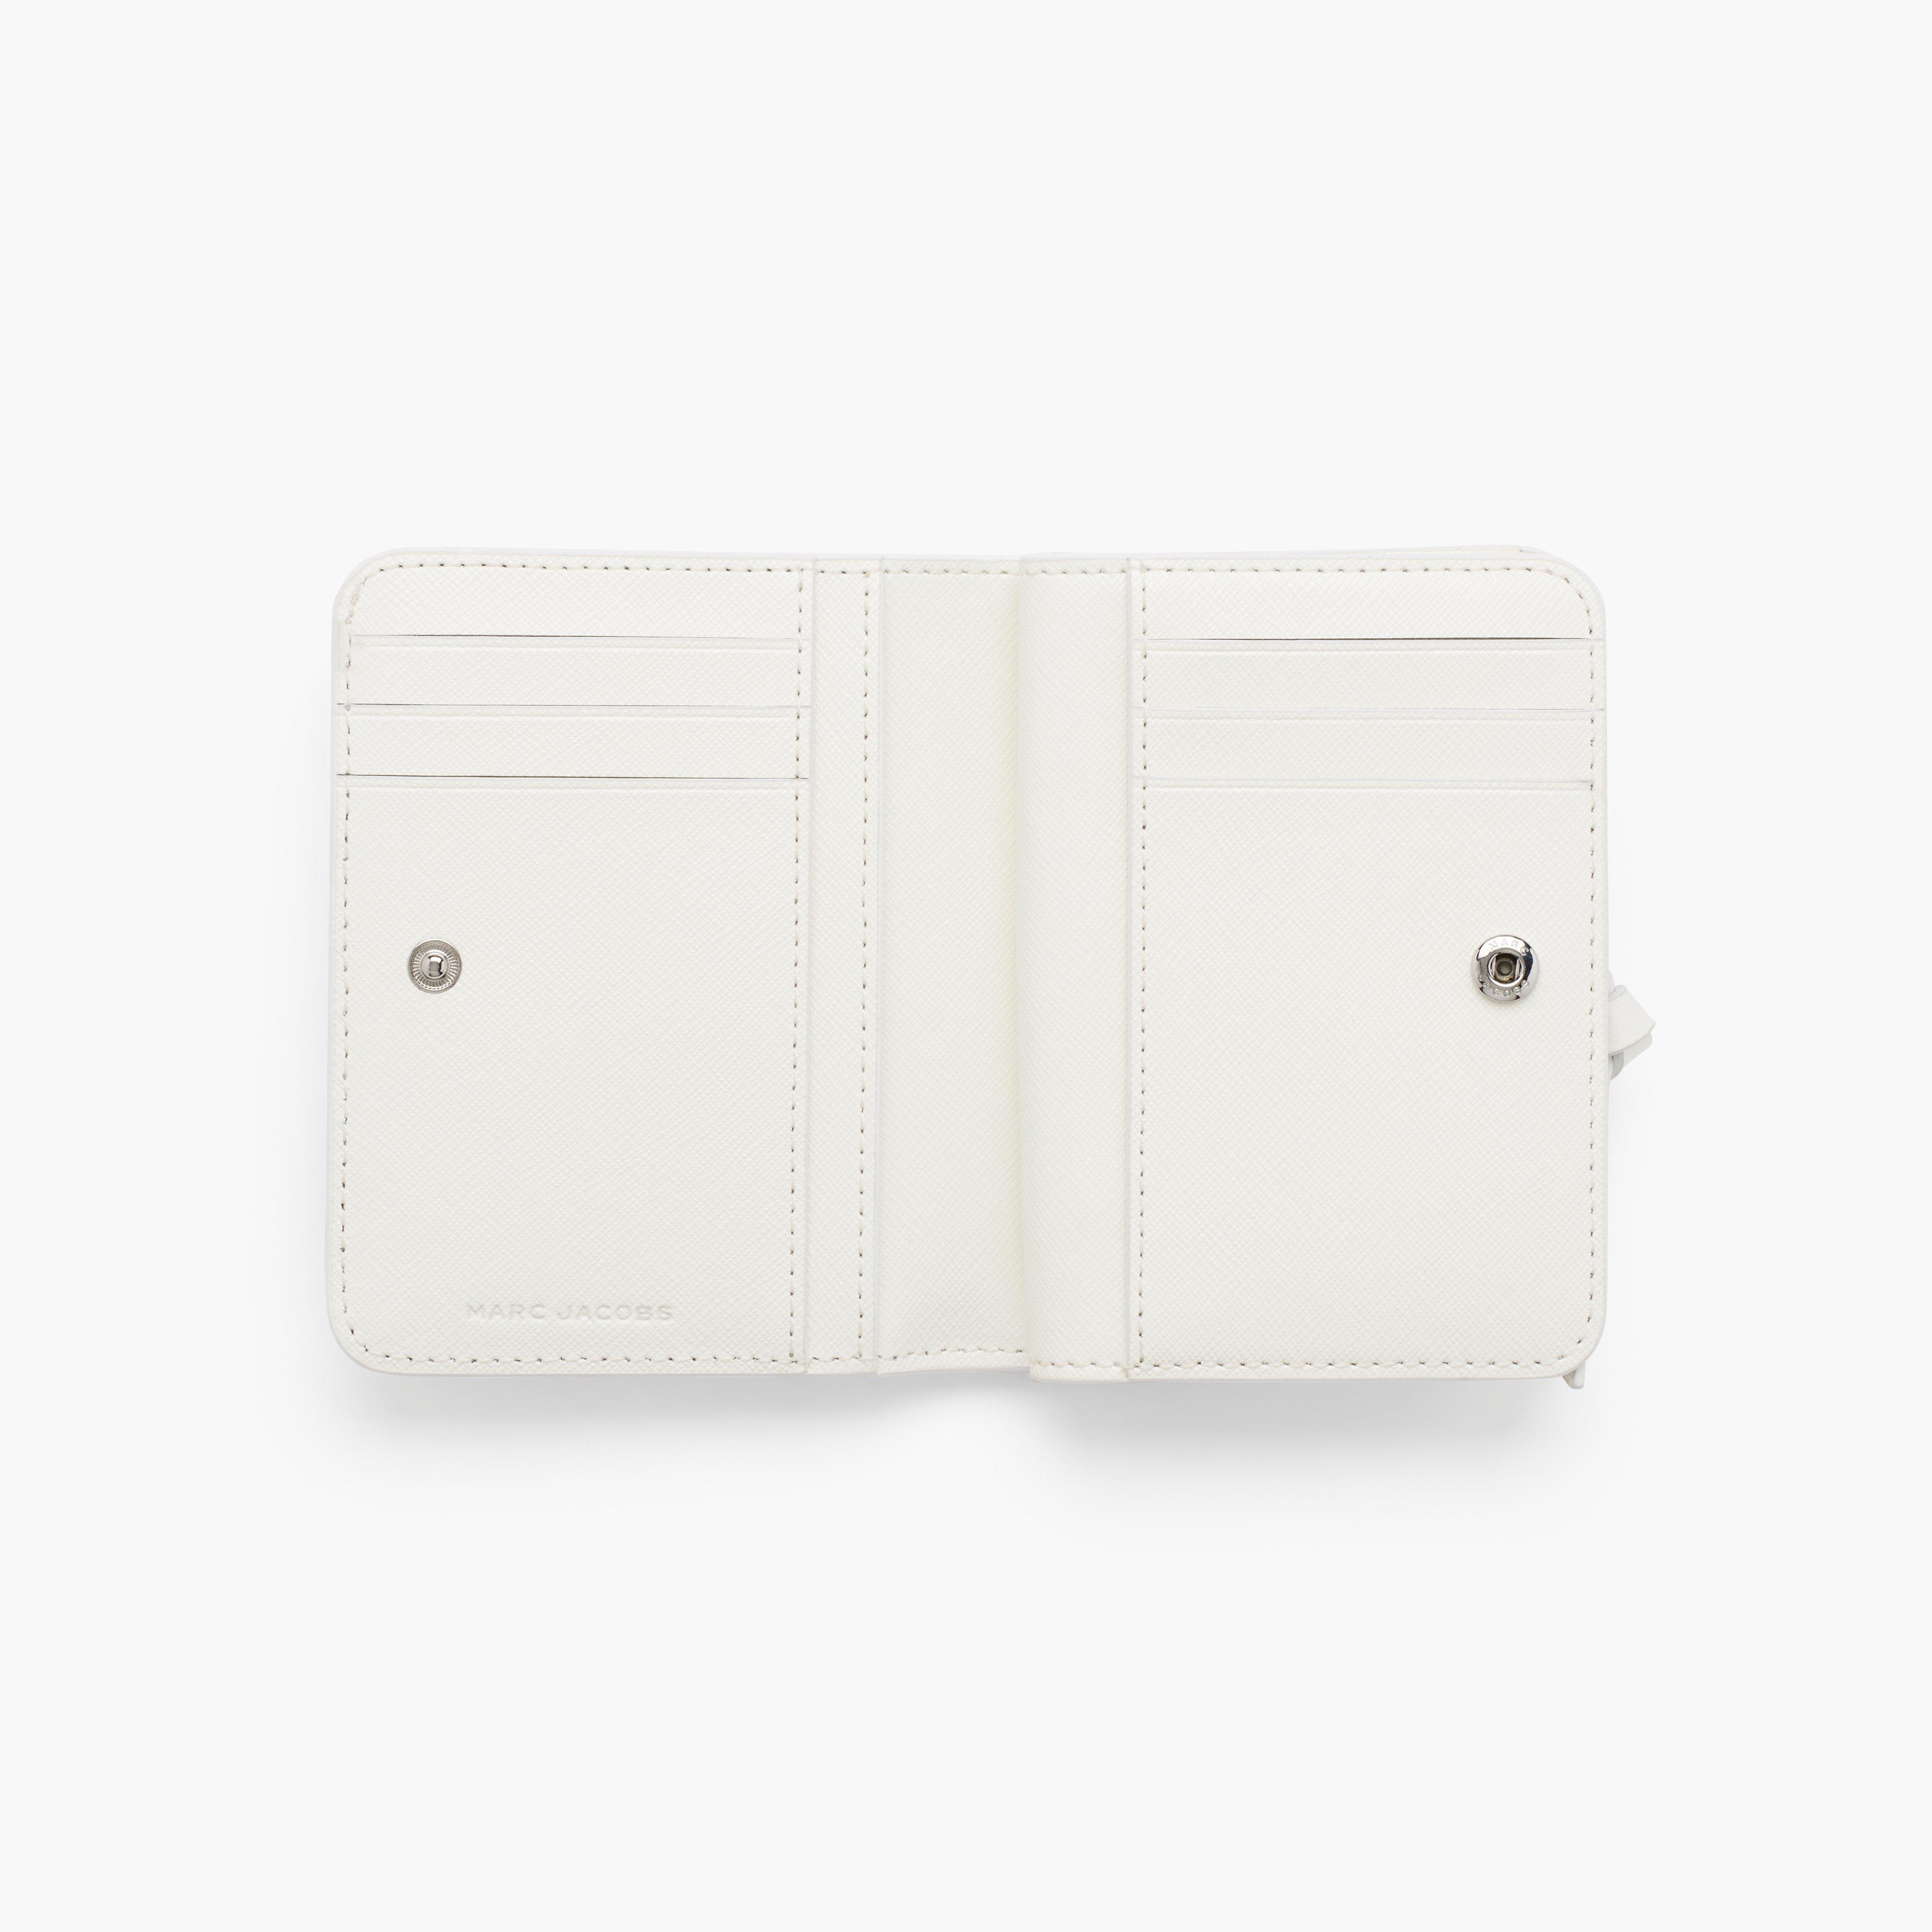 THE FUTURE FLORAL LEATHER UTILITY MINI COMPACT WALLET